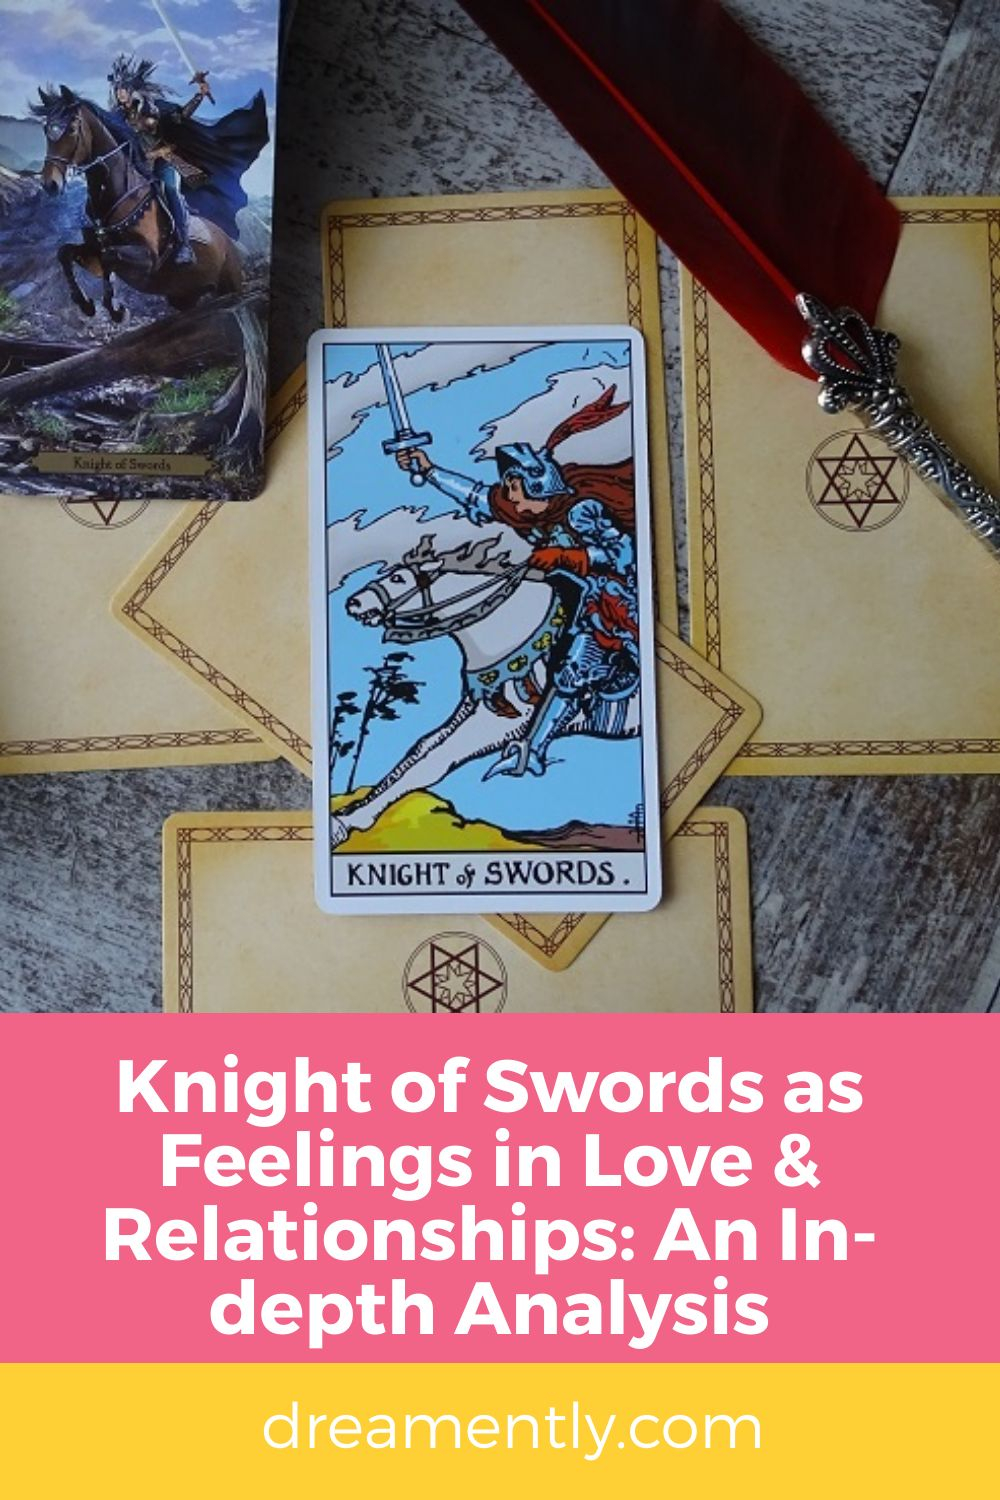 Knight of Swords as Feelings in Love & Relationships An In-depth Analysis